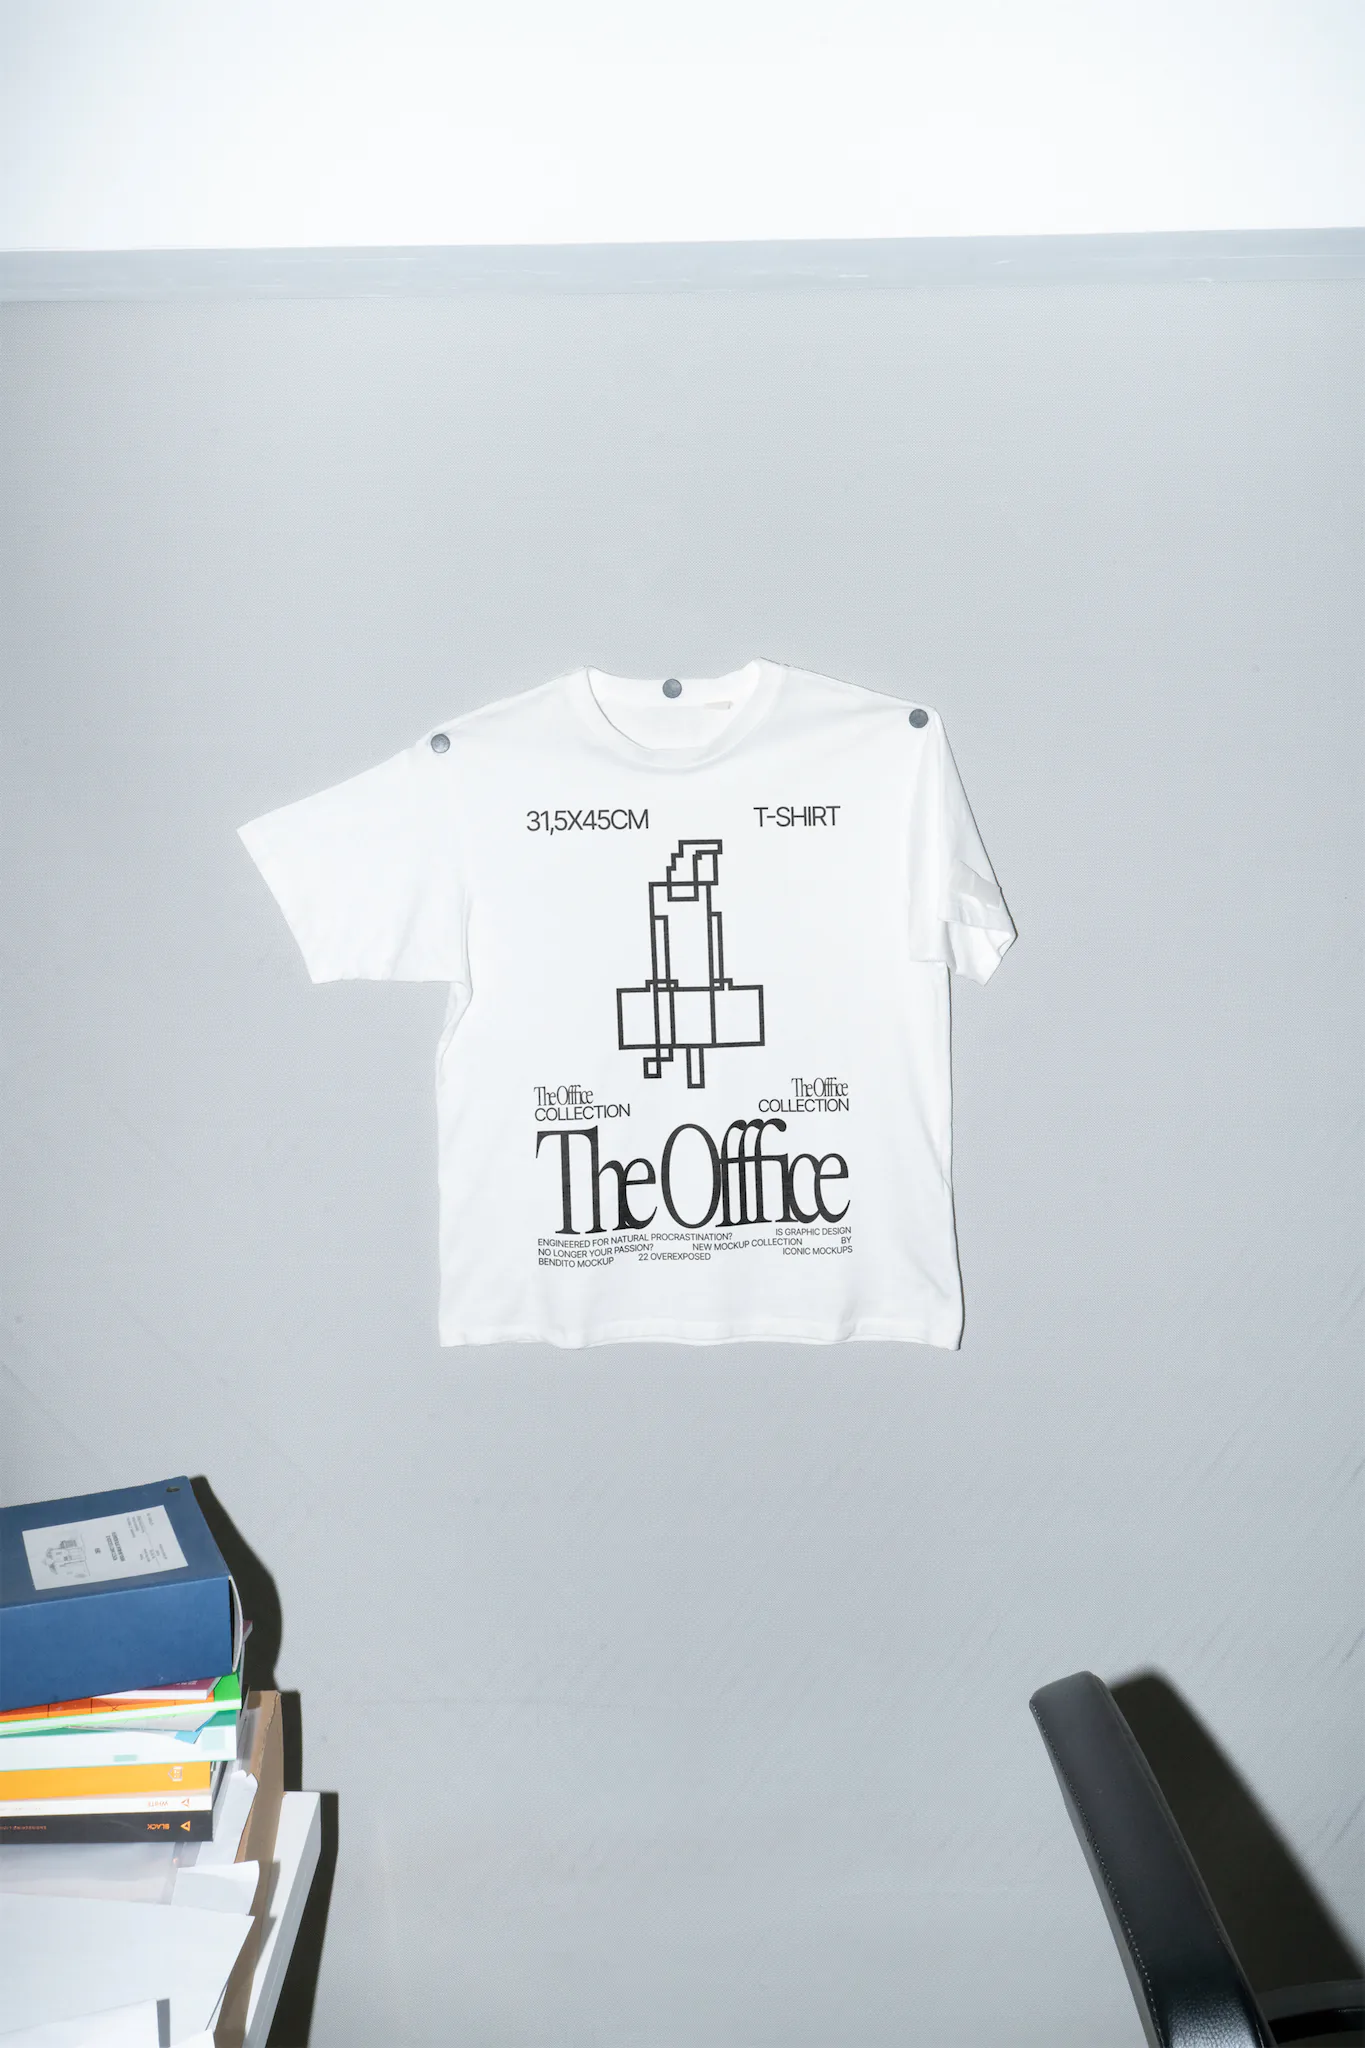 T-shirt mockup hanging on a wall with one of its sleeves open and the other one closed next to an office table with papers on top